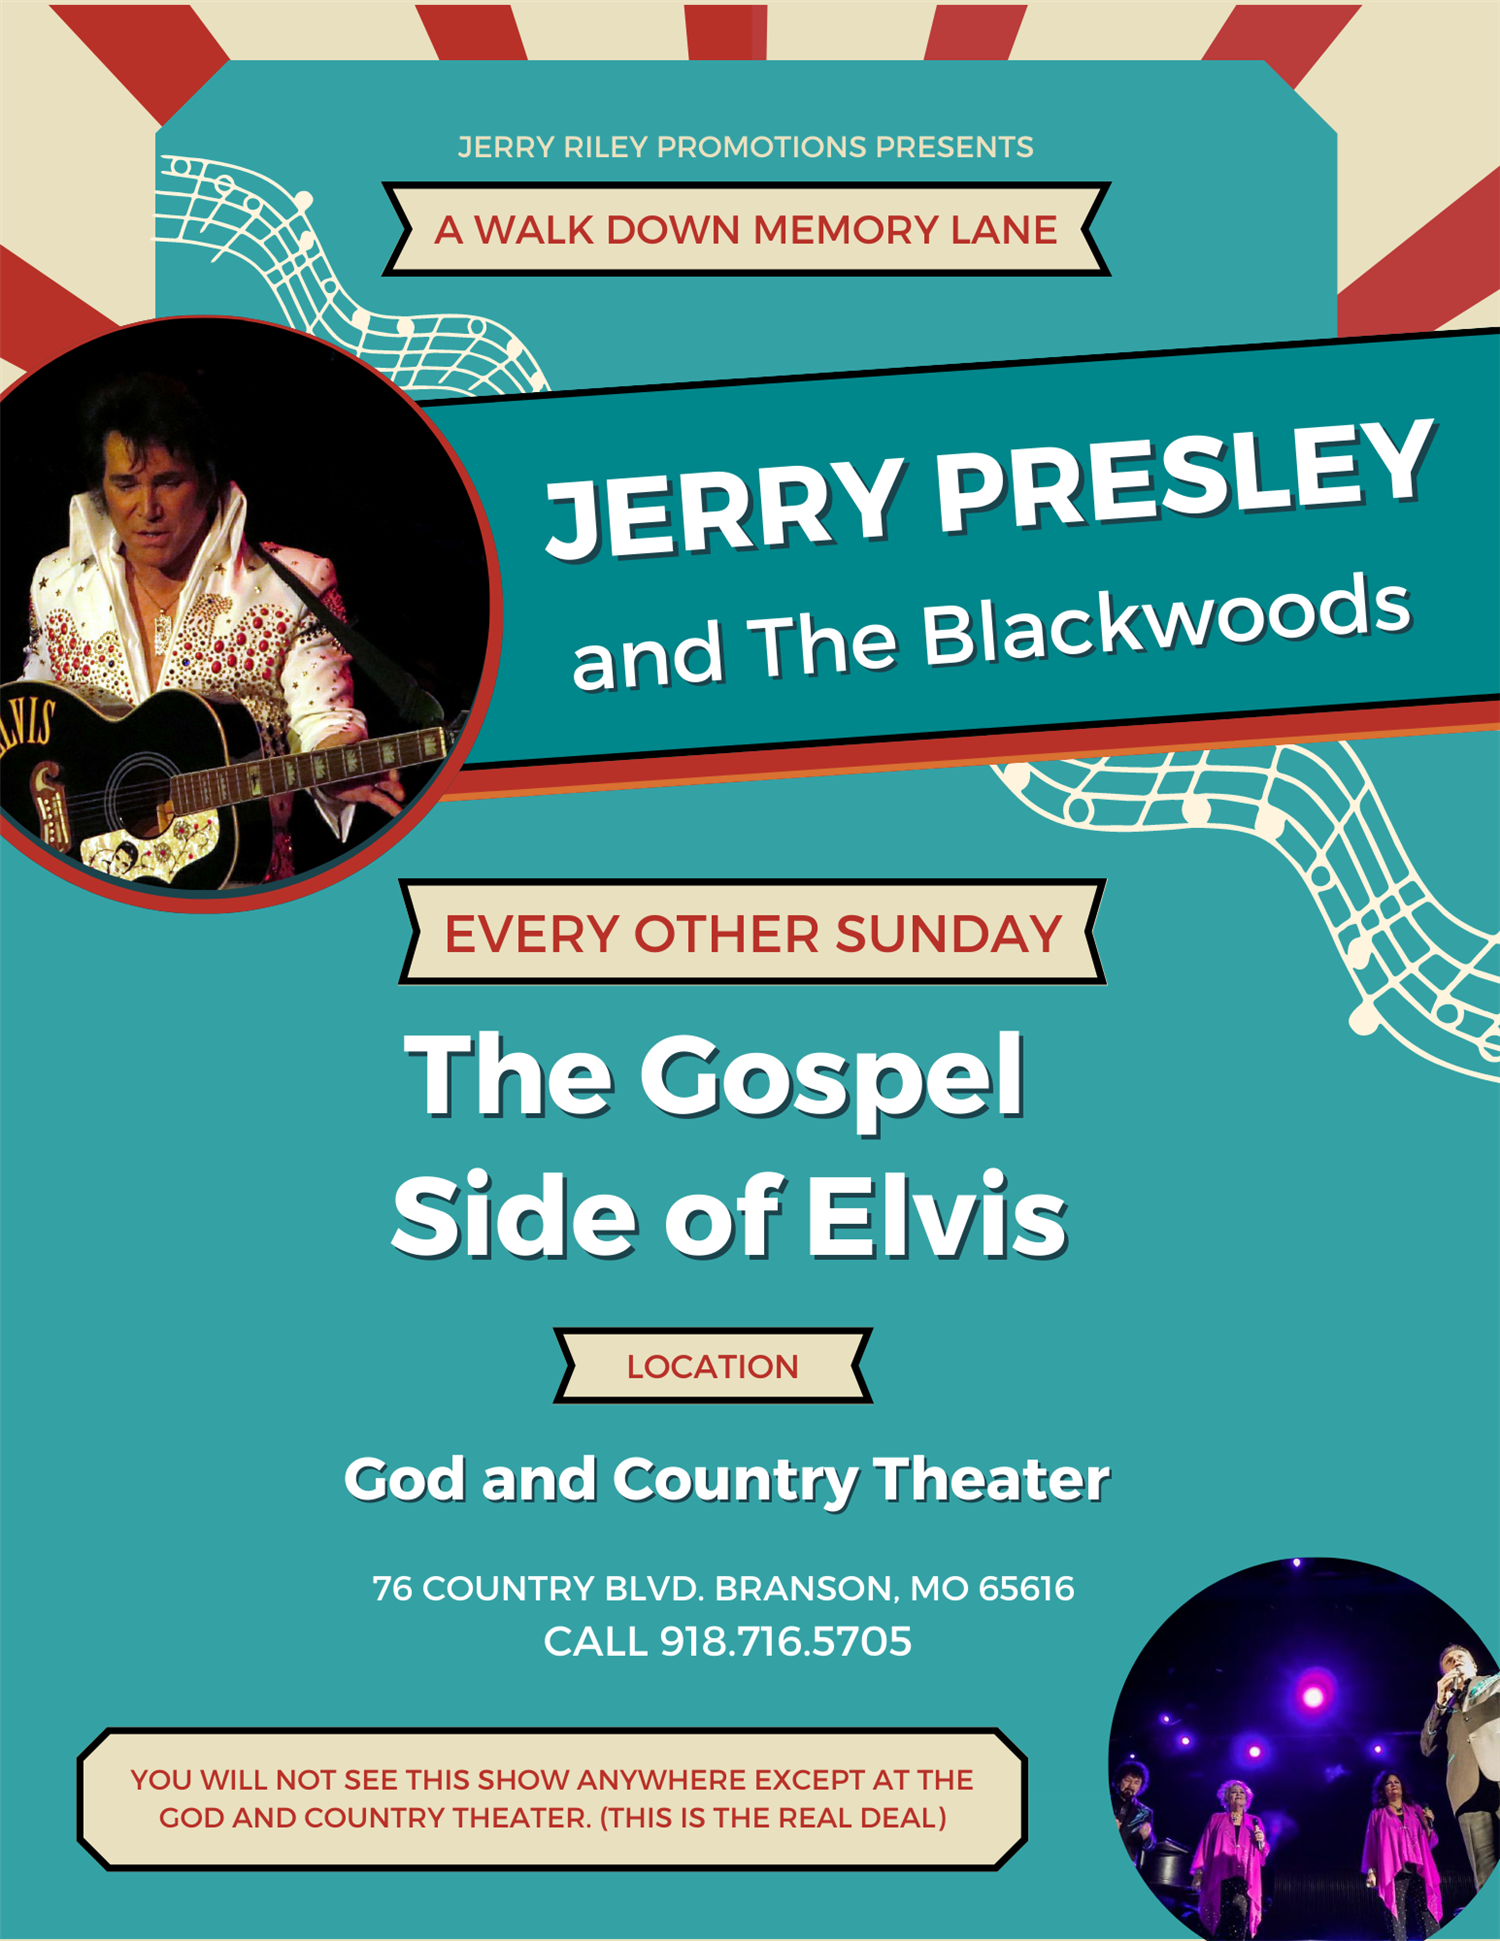 Jerry Presley & The Blackwoods - Present - The Gospel Side Of Elvis Every Other Sunday on Dec 02, 00:00@God and Country Theater - Pick a seat, Buy tickets and Get information on Jerry Riley Promotions 